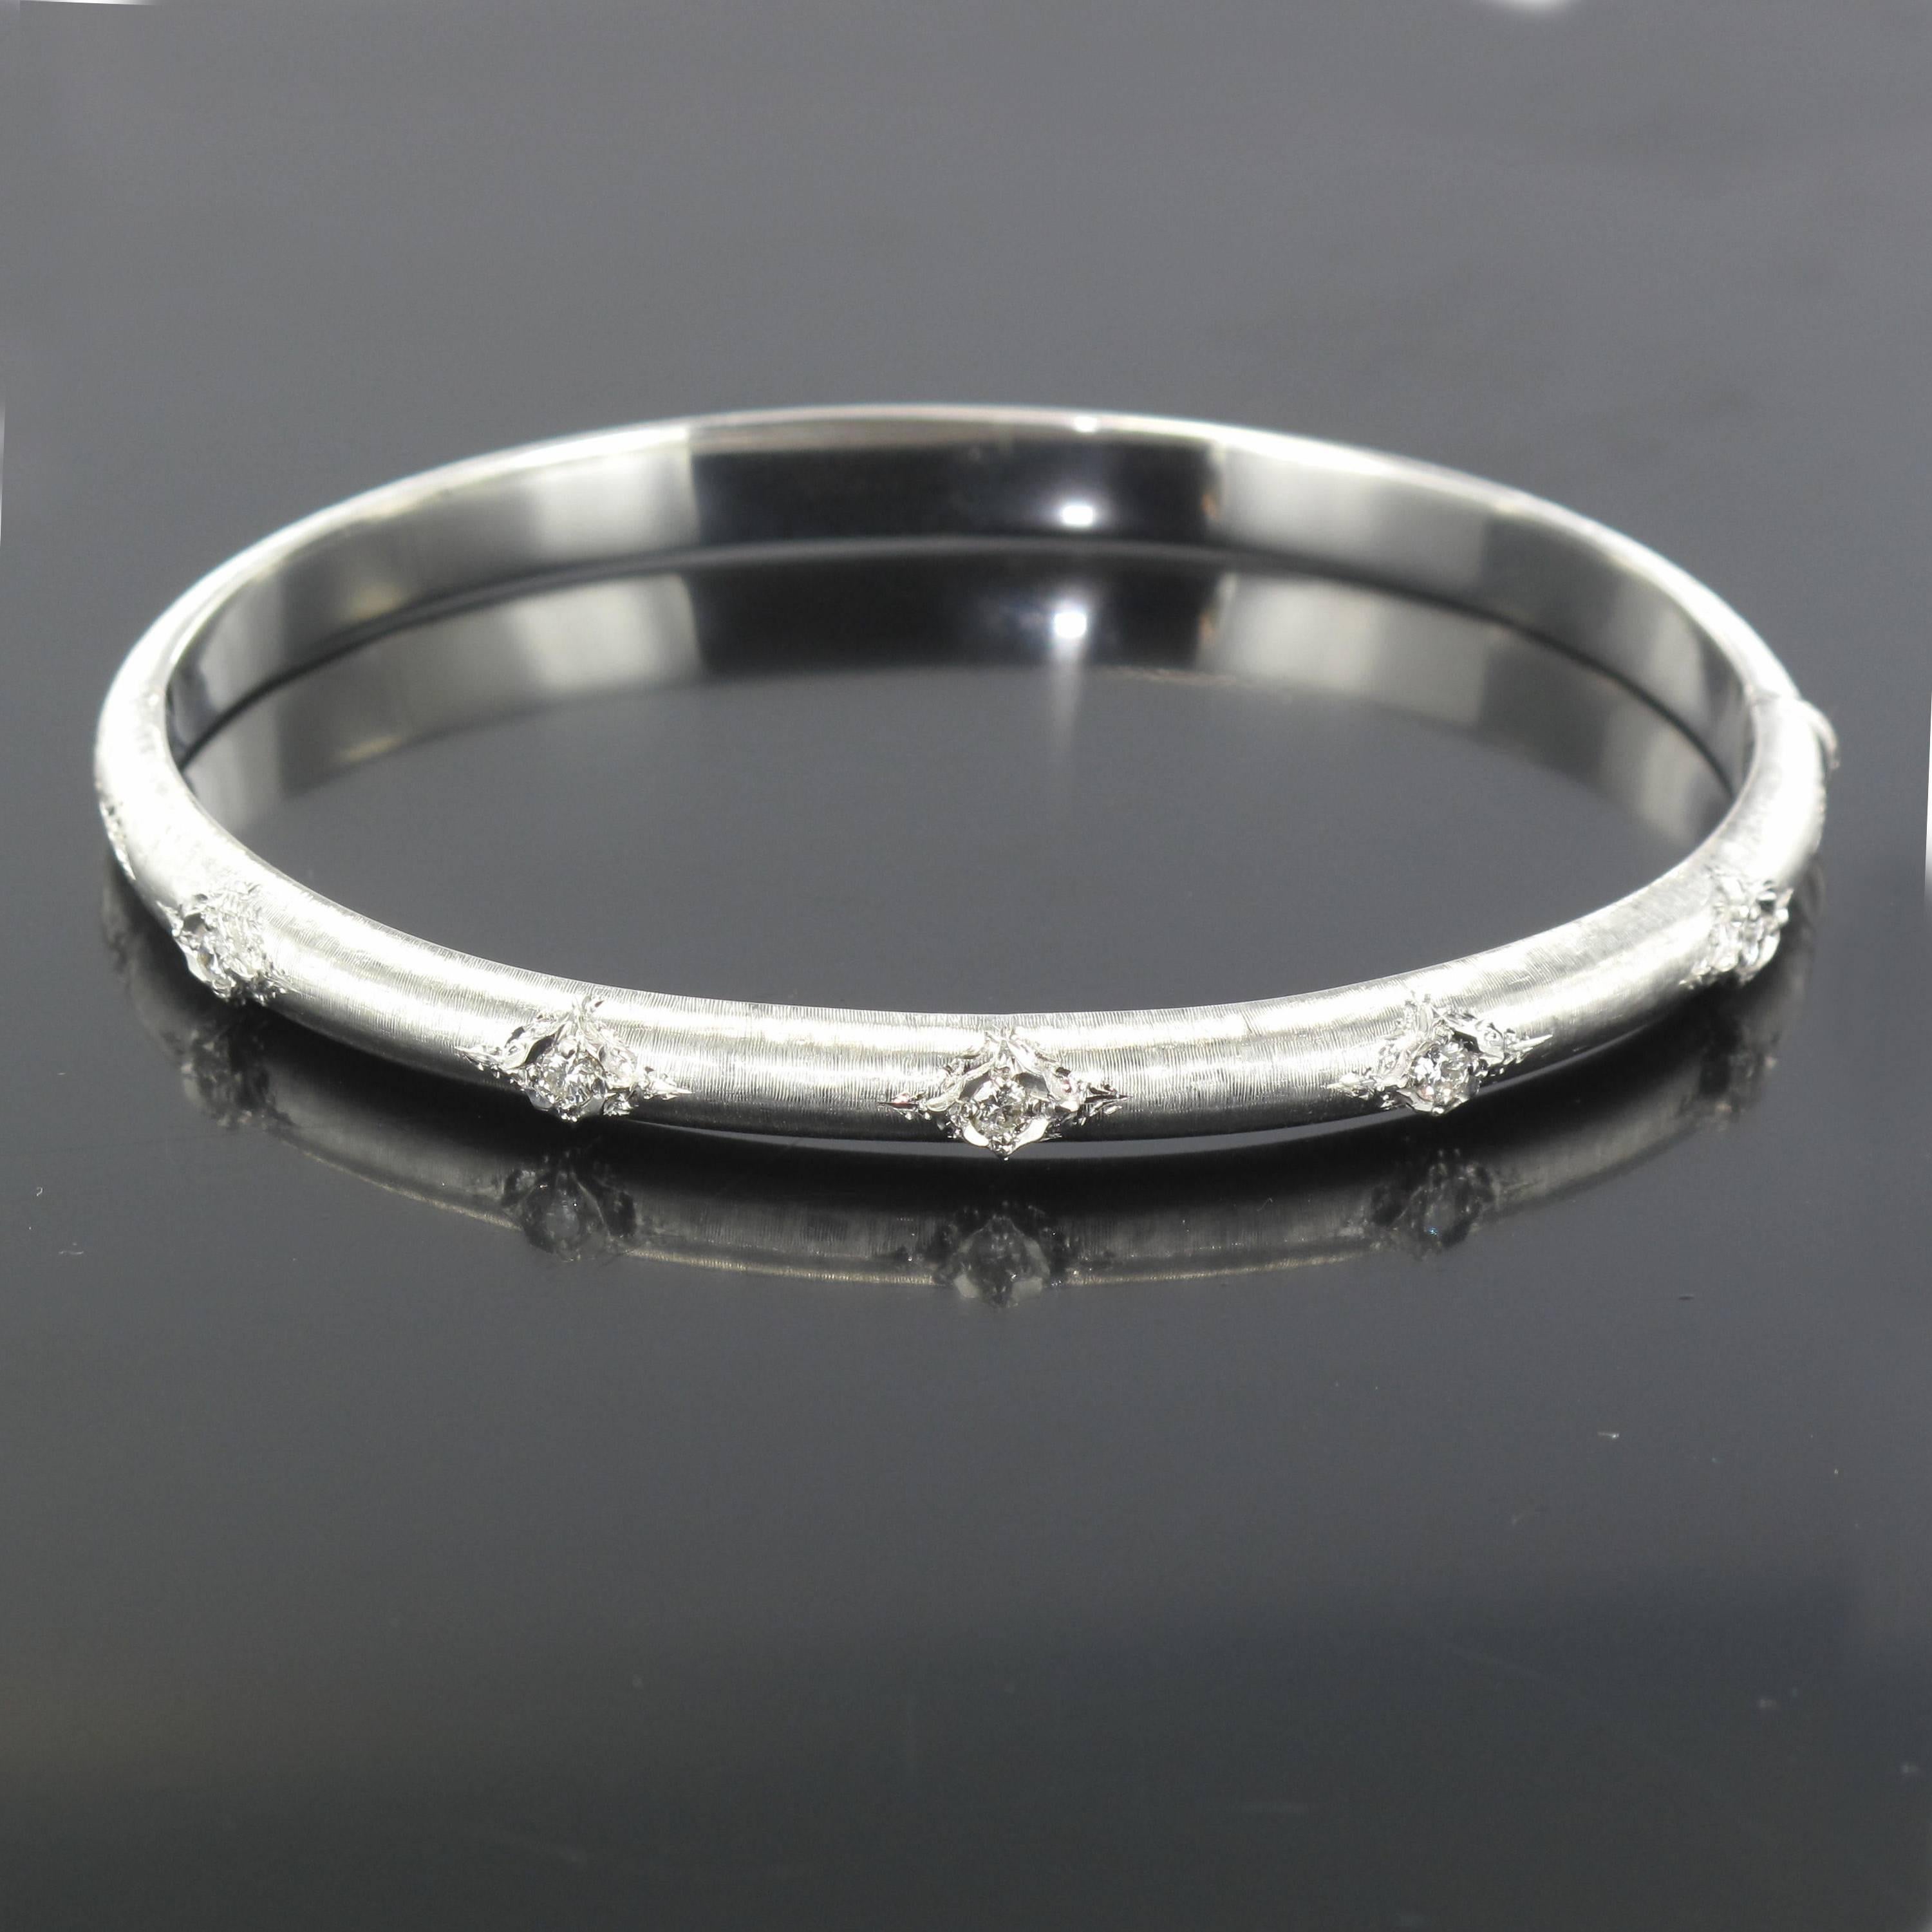 Bangle bracelet in 18 carat satin white gold.
This delightful white gold bangle bracelet is oval and rounded in form. Created in brushed white gold it is engraved and set with 5 brilliant cut diamonds at the front, it opens with a hinge. 
Total